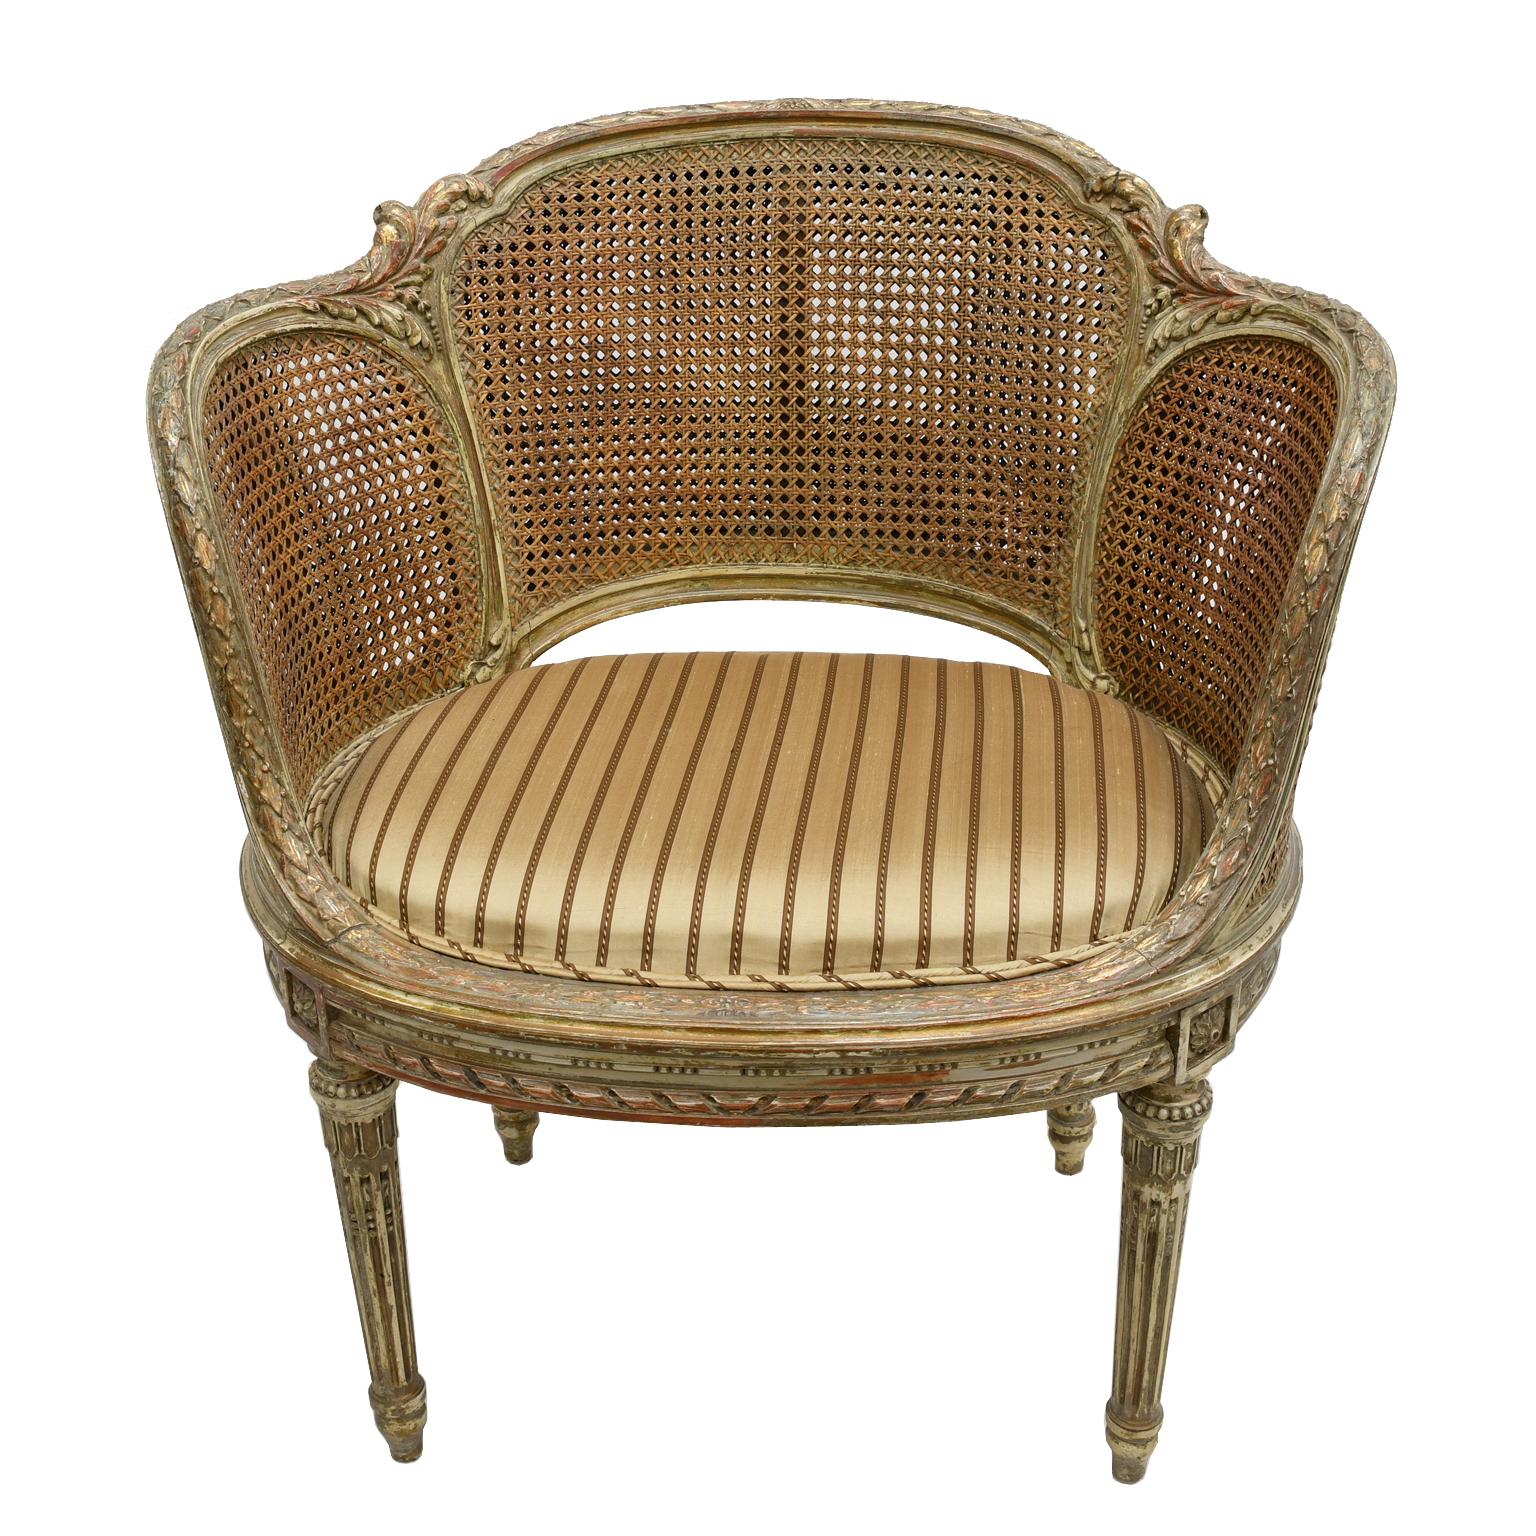 A very lovely French 19th century Louis XVI style desk chair or 